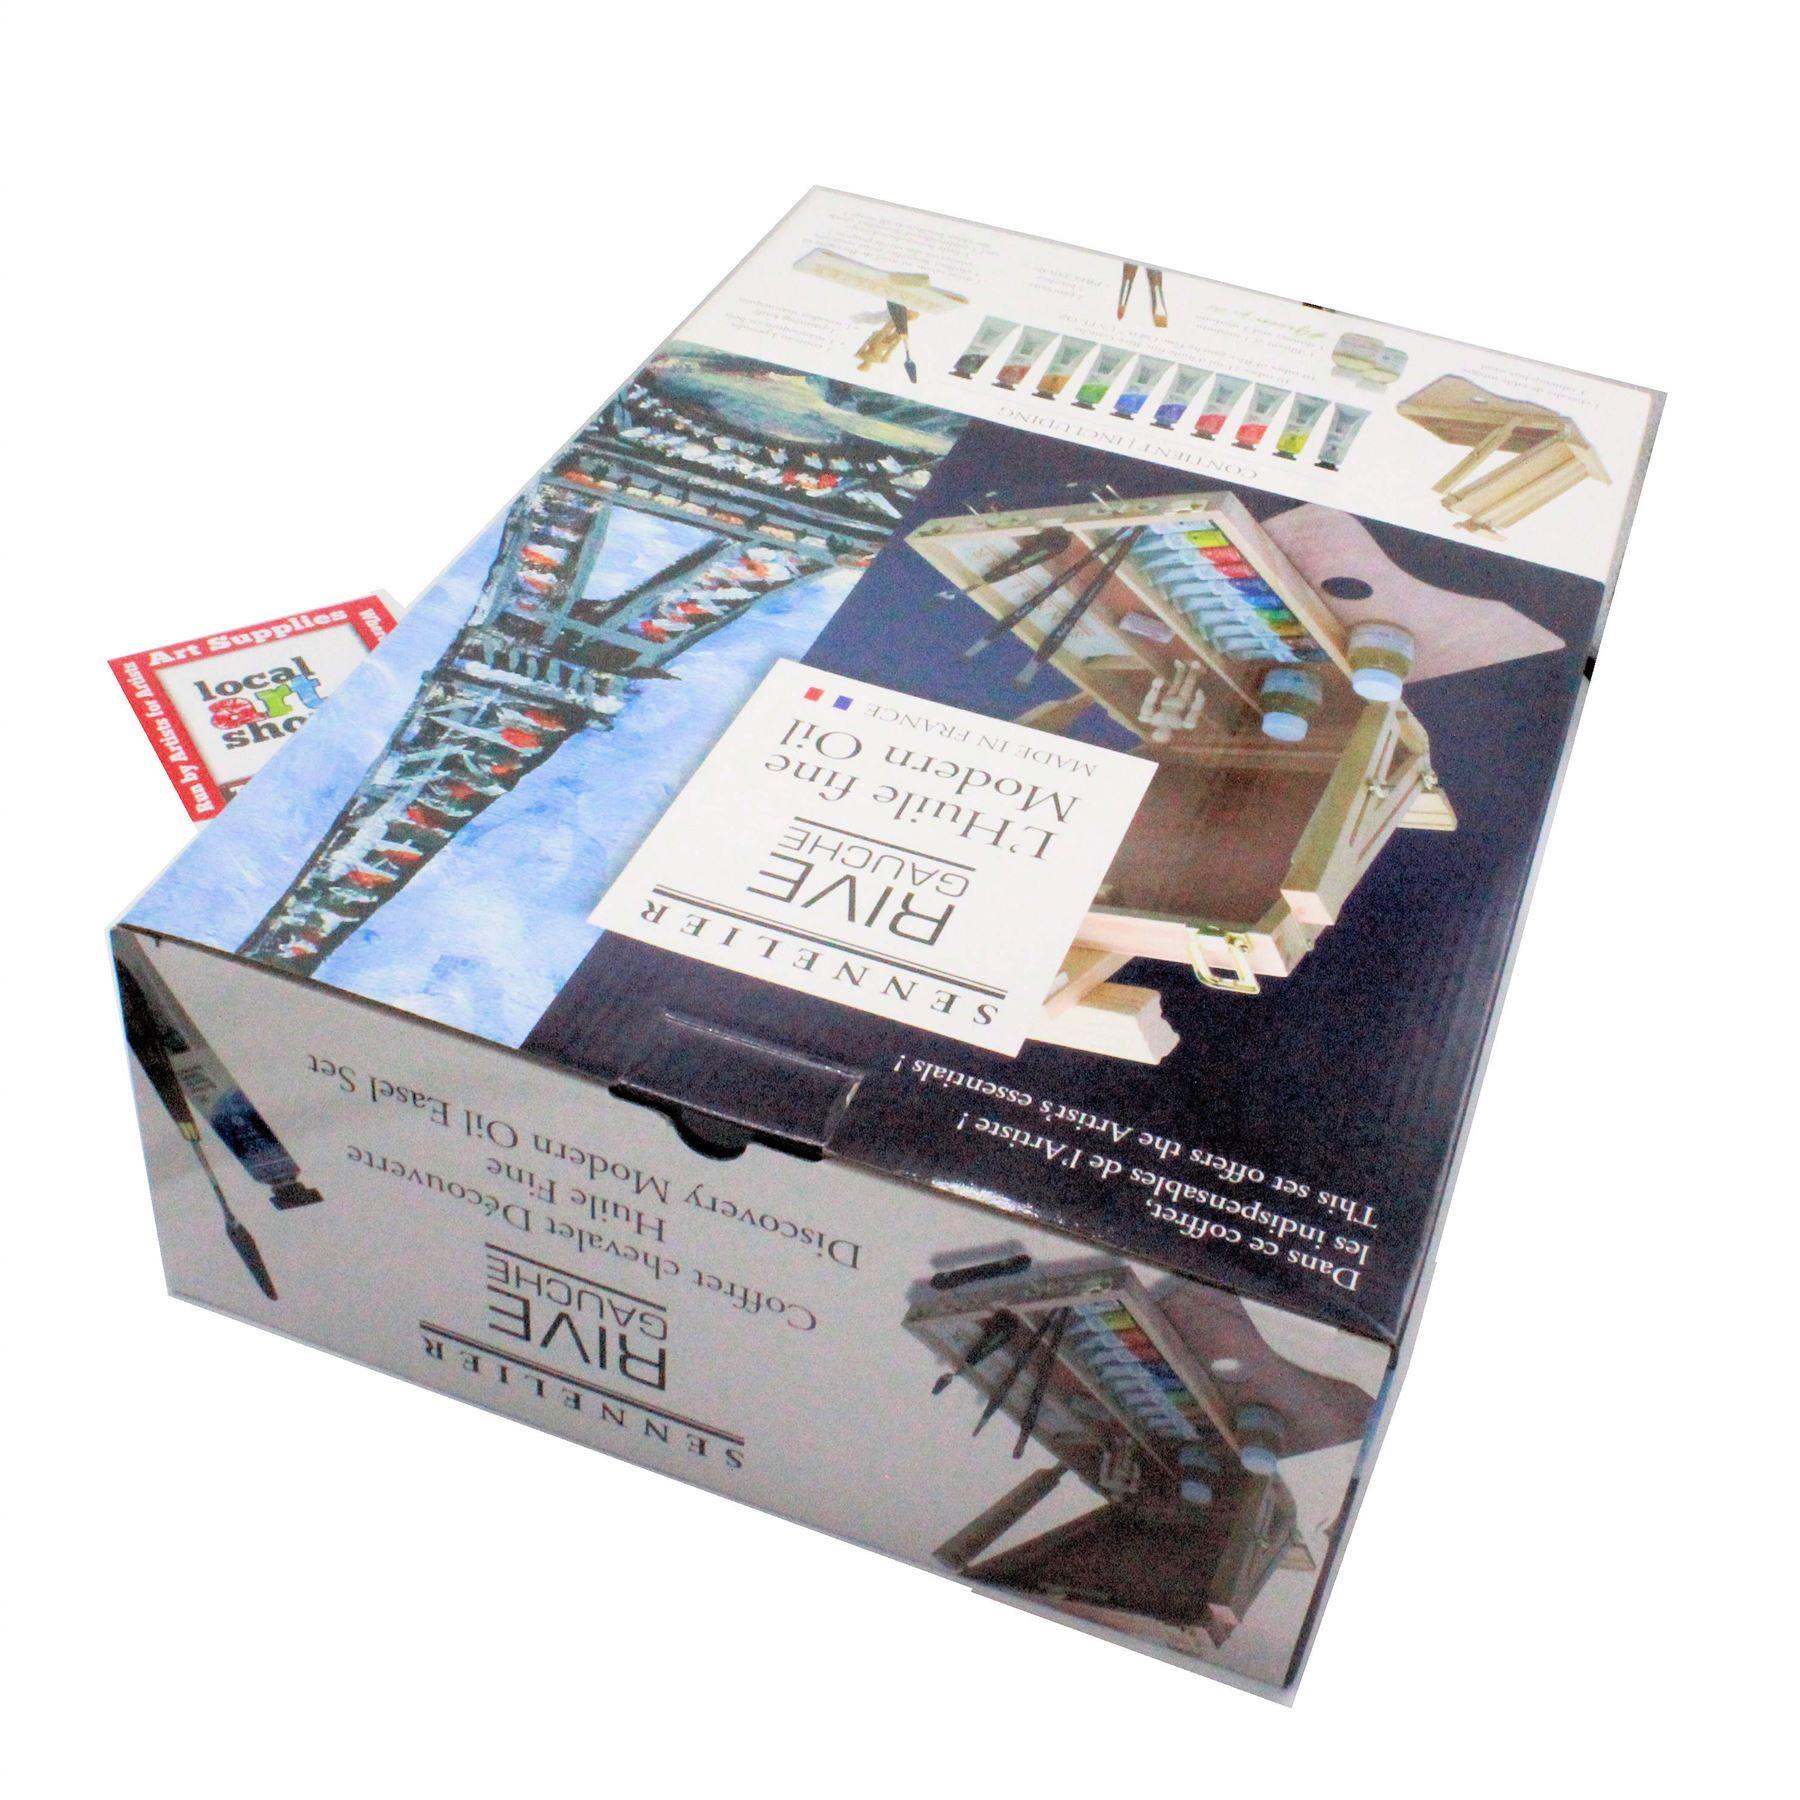 Best student oil paint and easel set by Sennelier